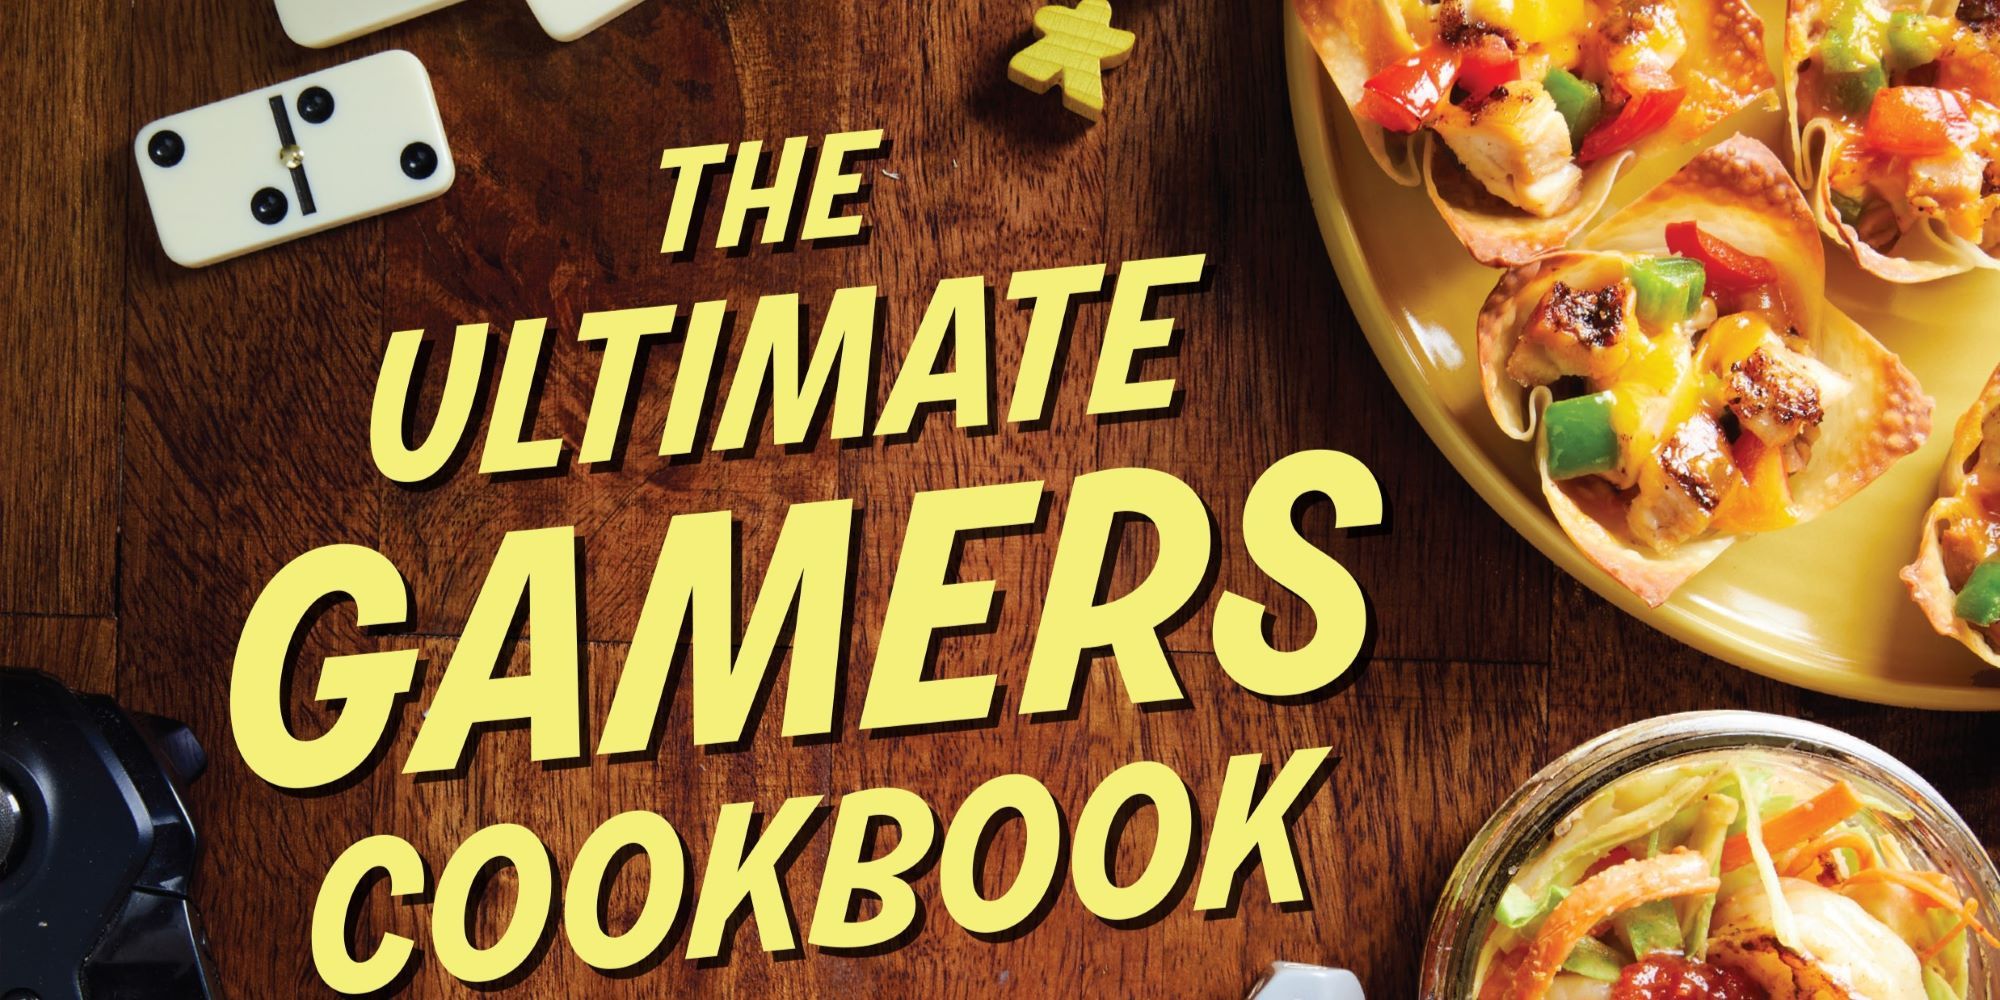 The Ultimate Gamers Cookbook: Recipes for an Epic  